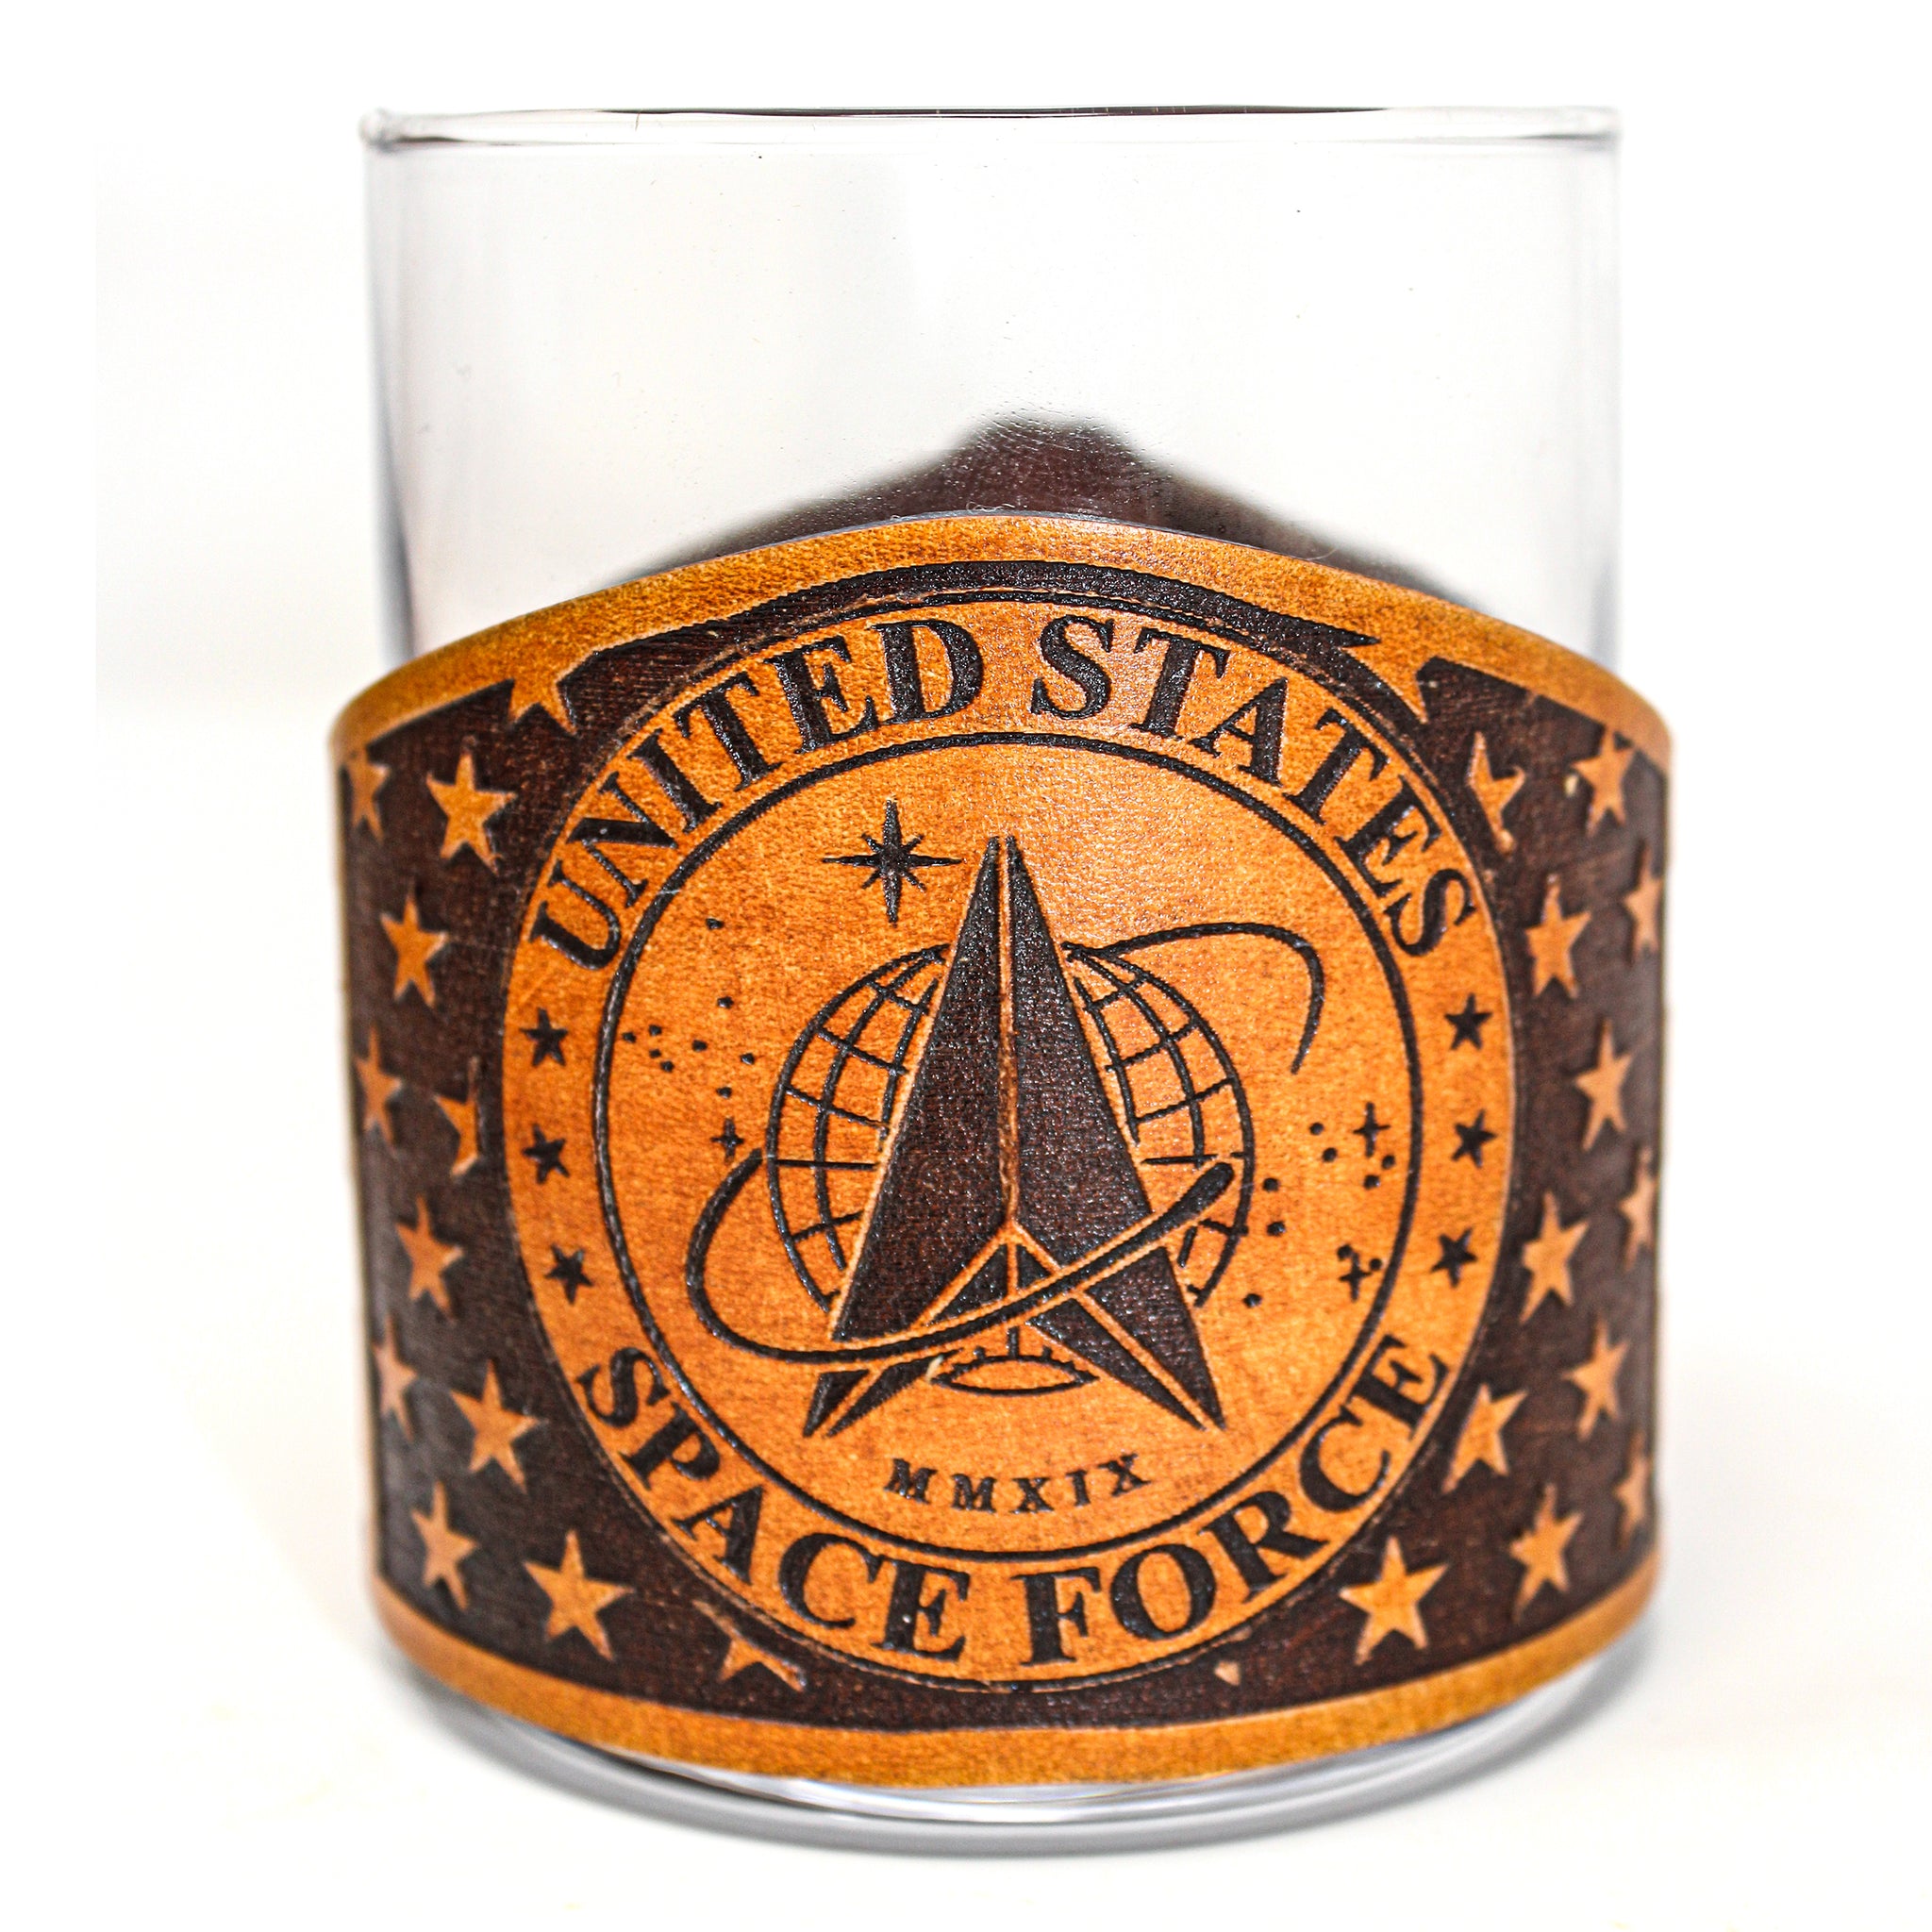 Whiskey Glass Leather Wrap - American flag Space Force Engraved